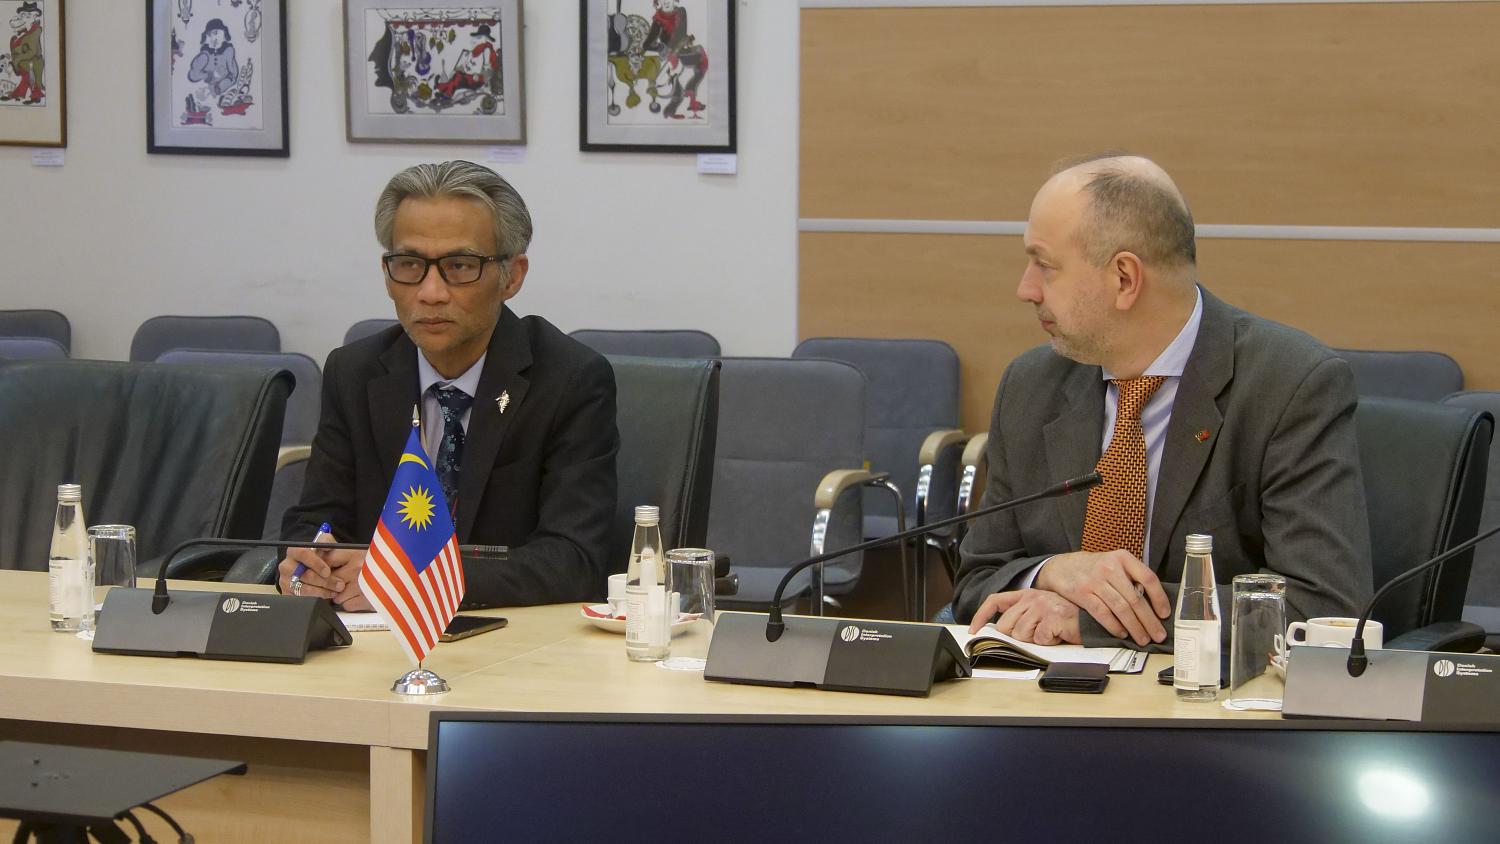 The MCCI hosted a distinguished guest from Malaysia